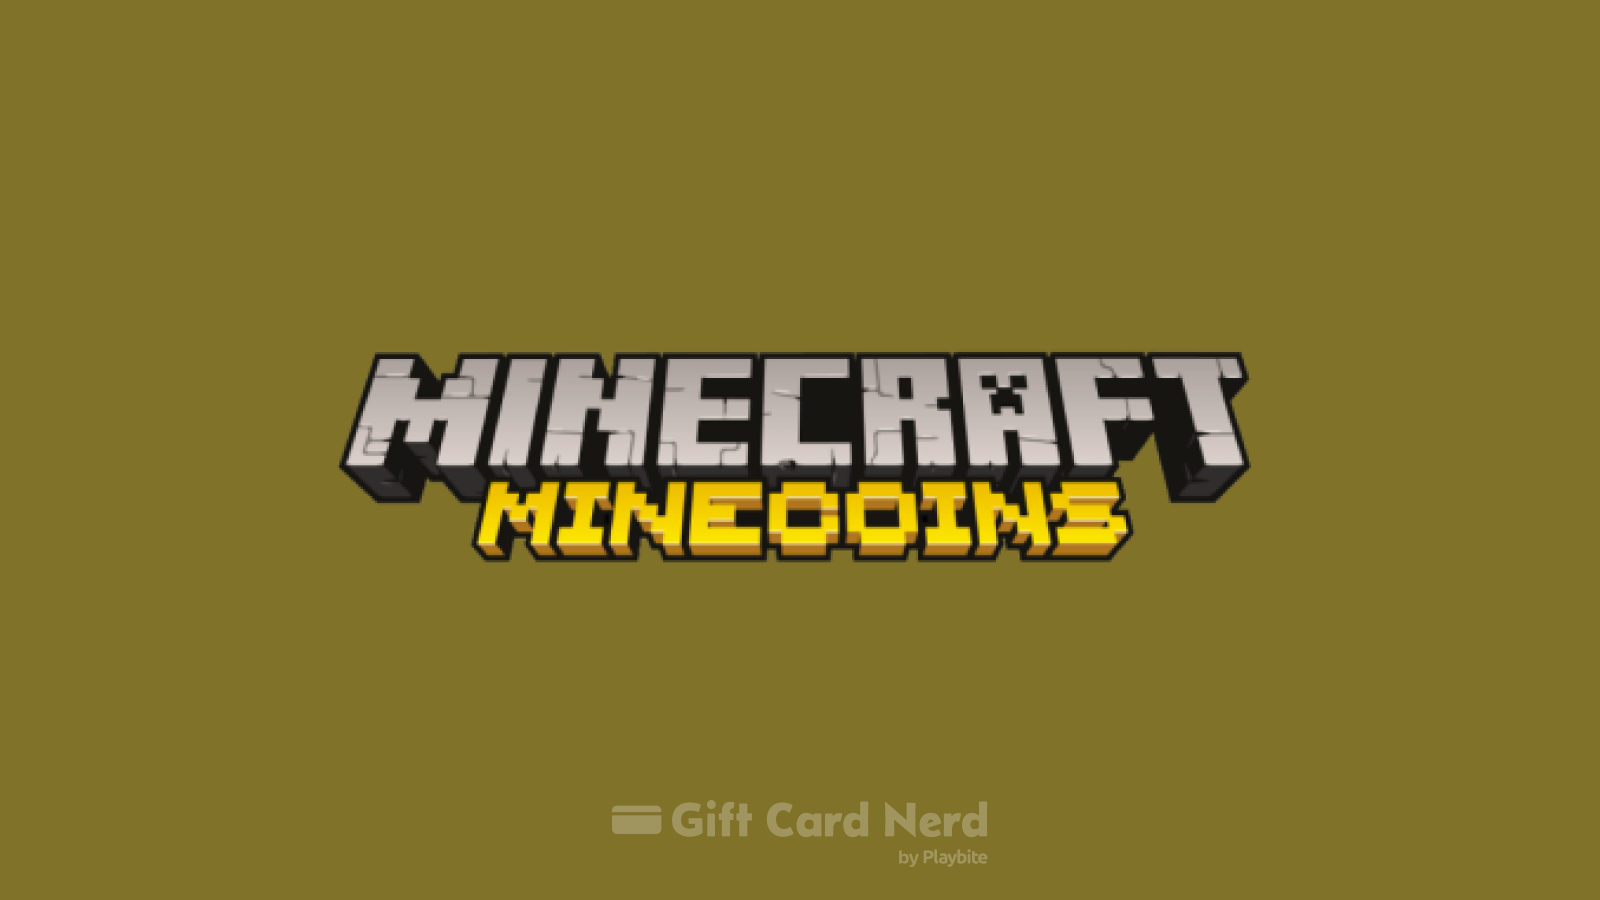 Can You Use a Minecraft Gift Card on DoorDash?